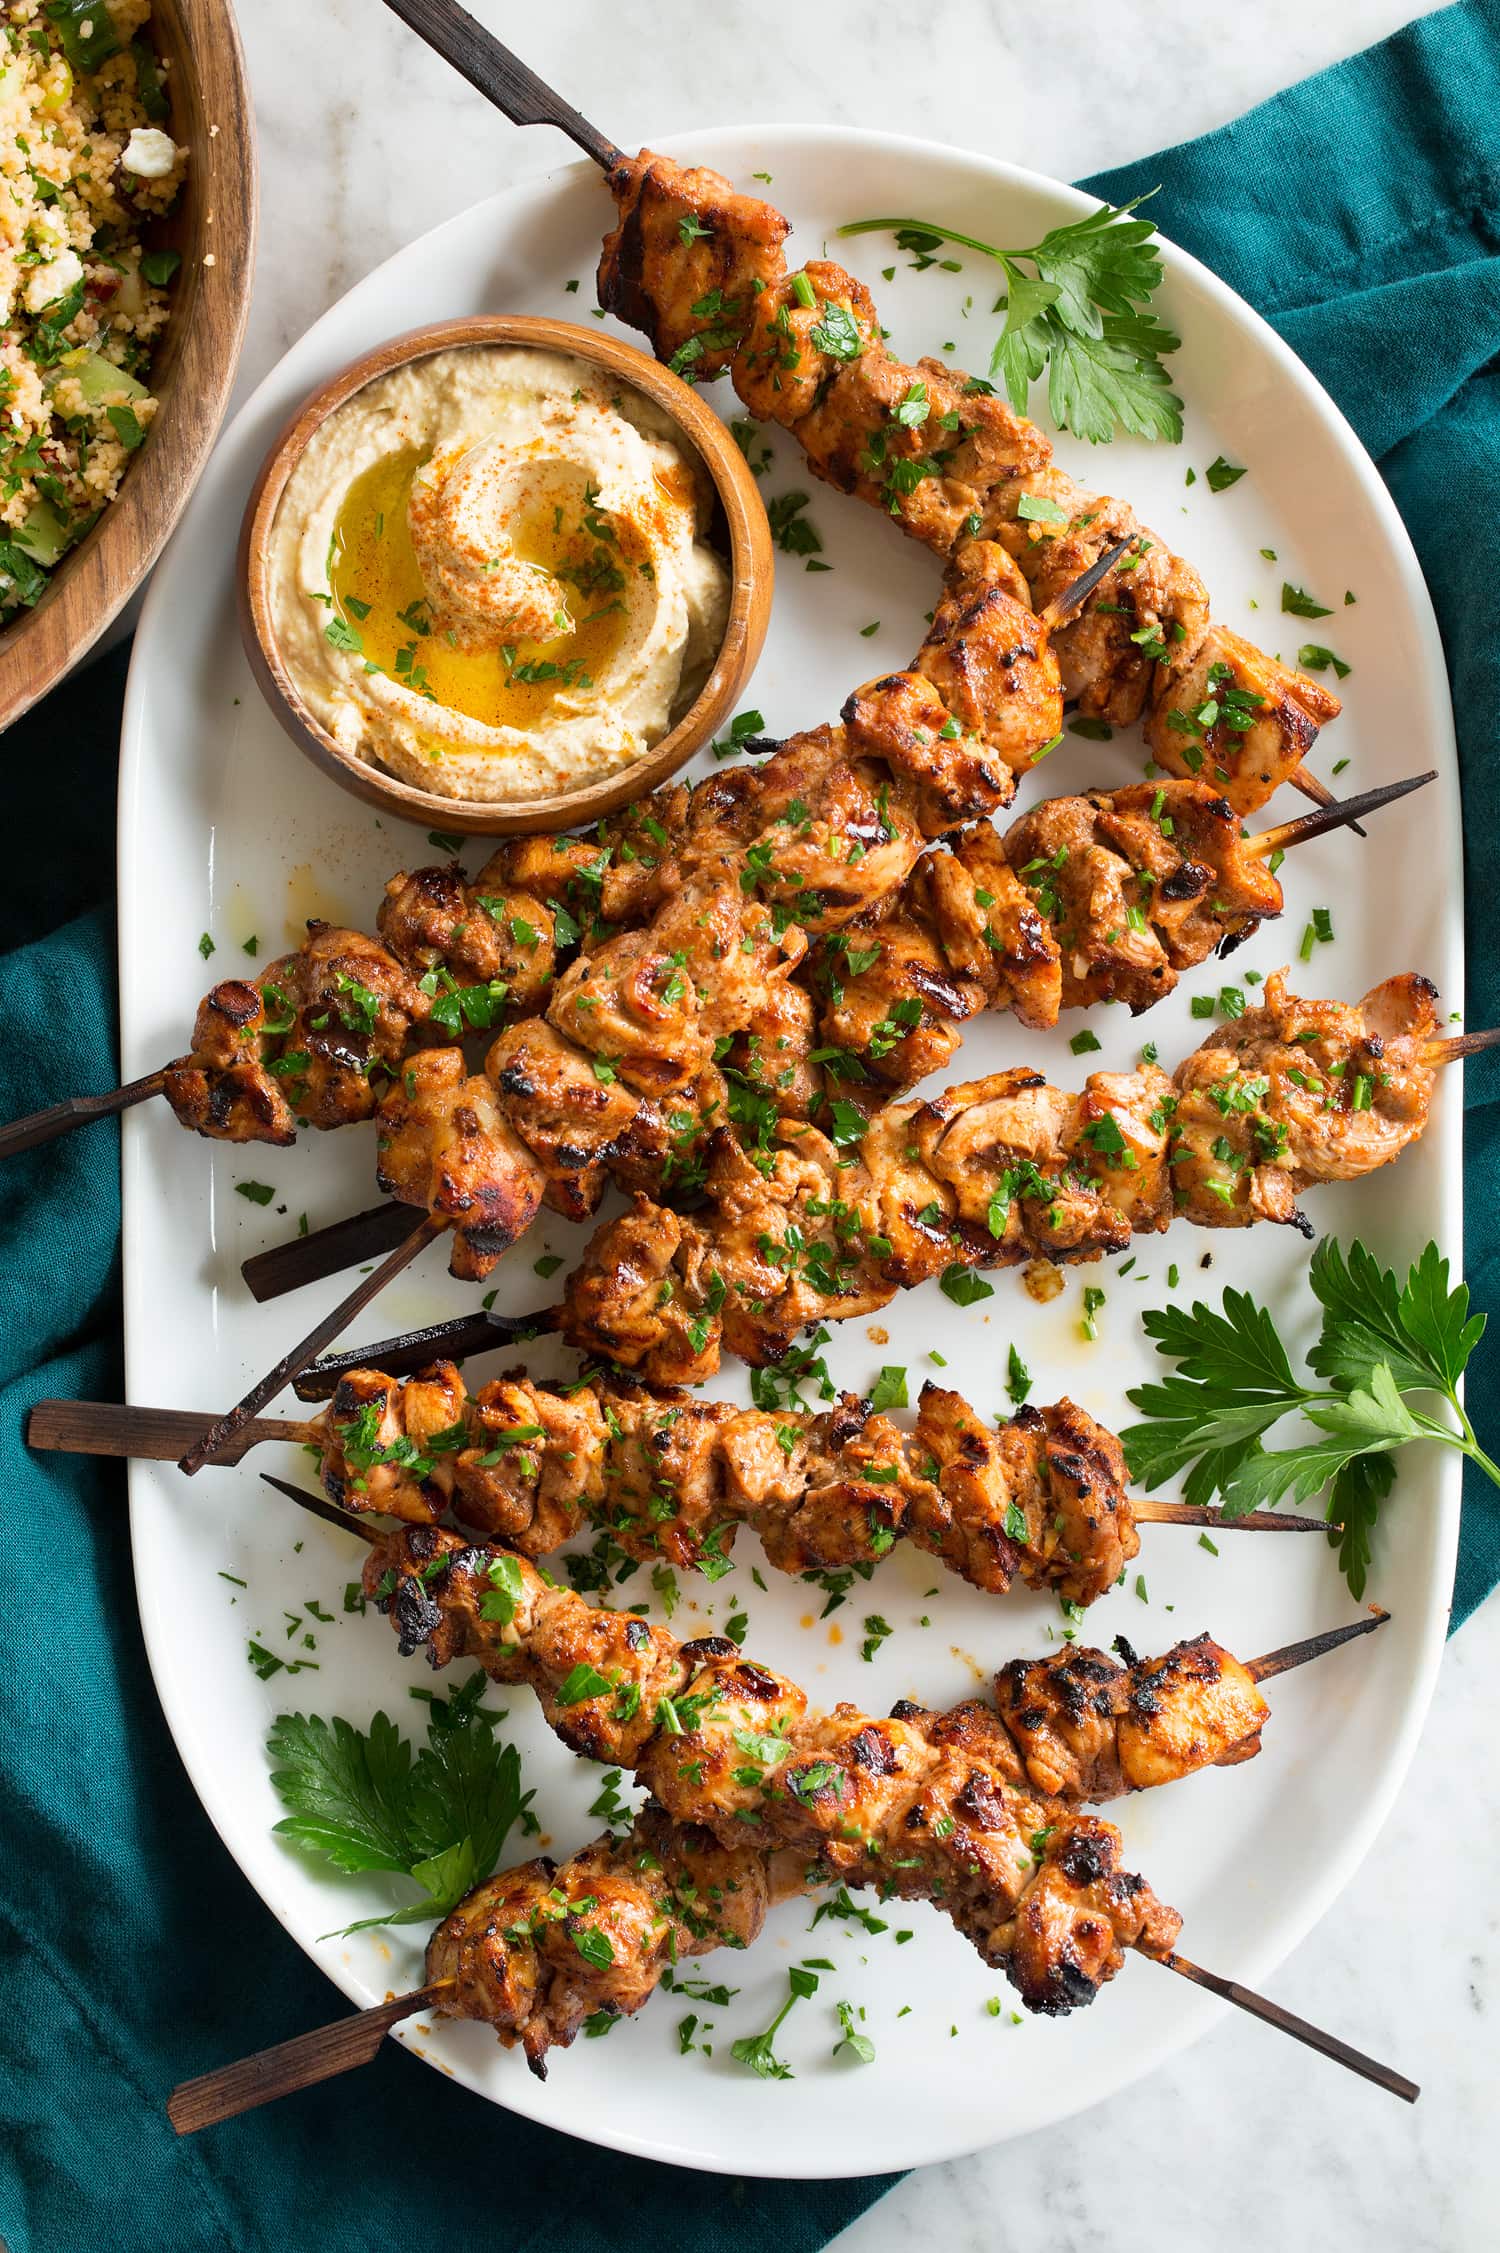 Grilled shish tawook skewers on a platter with parsley and hummus.